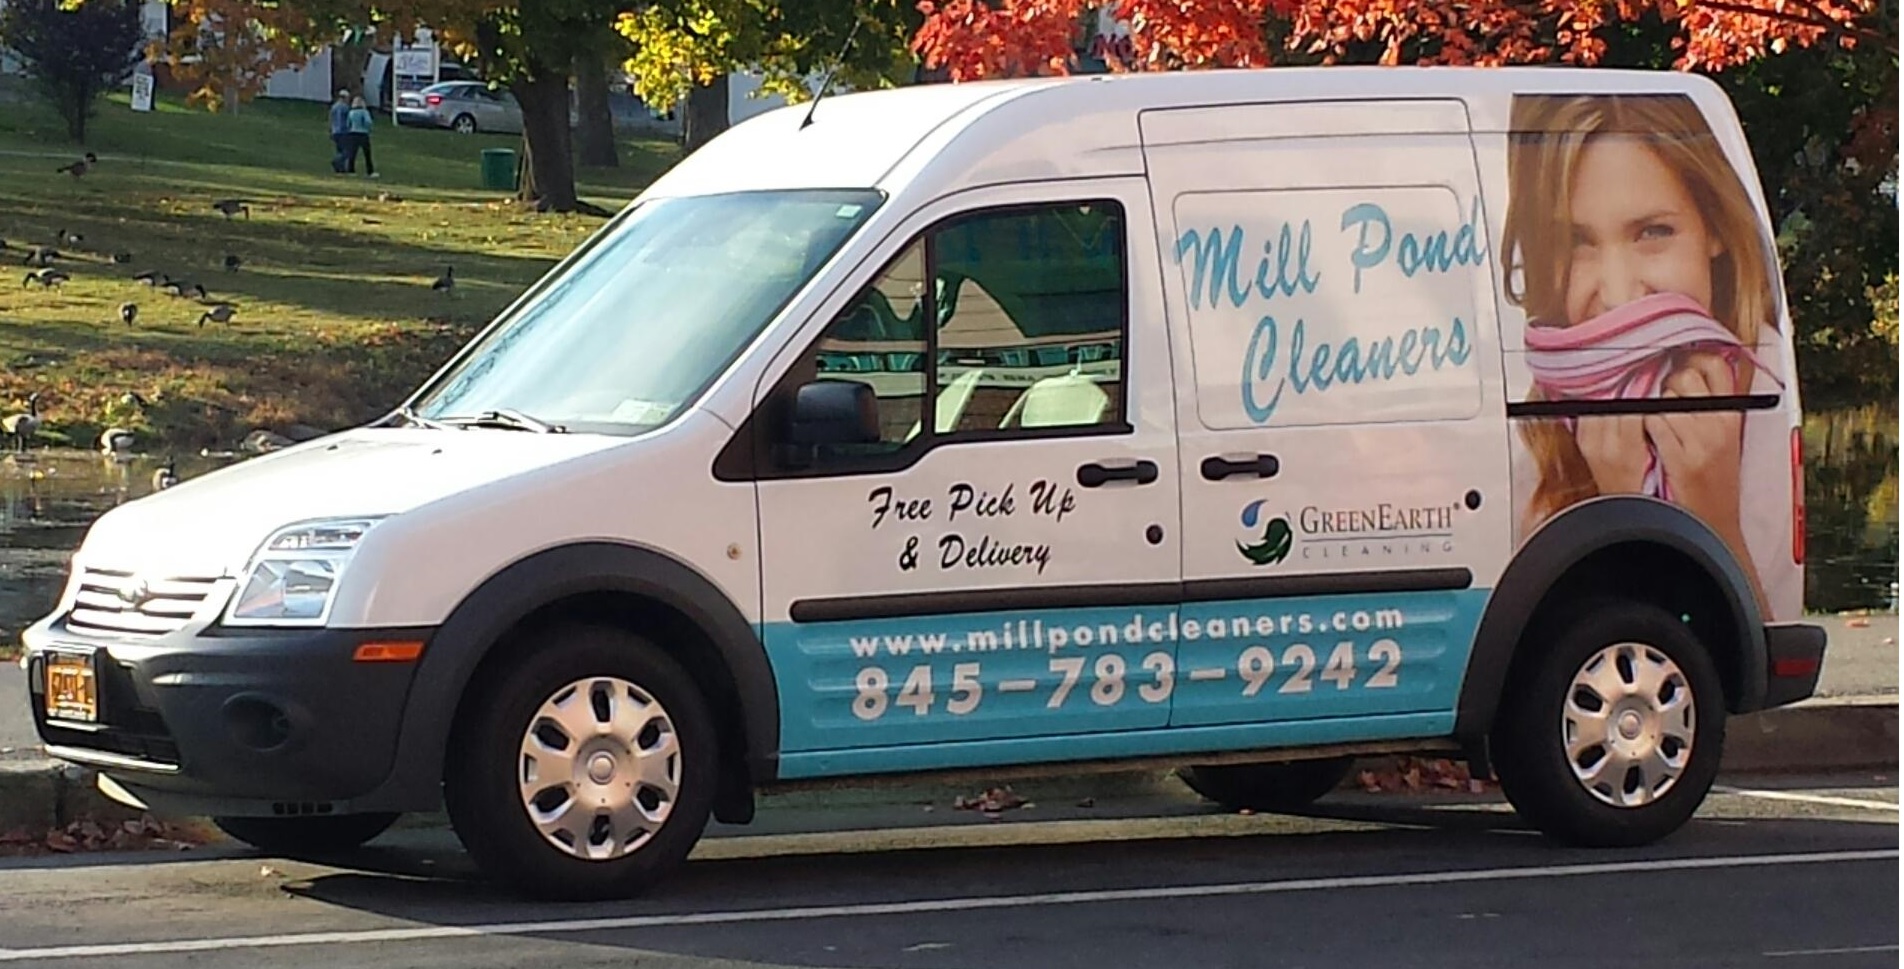 Millpond Cleaners will pick up and deliver!